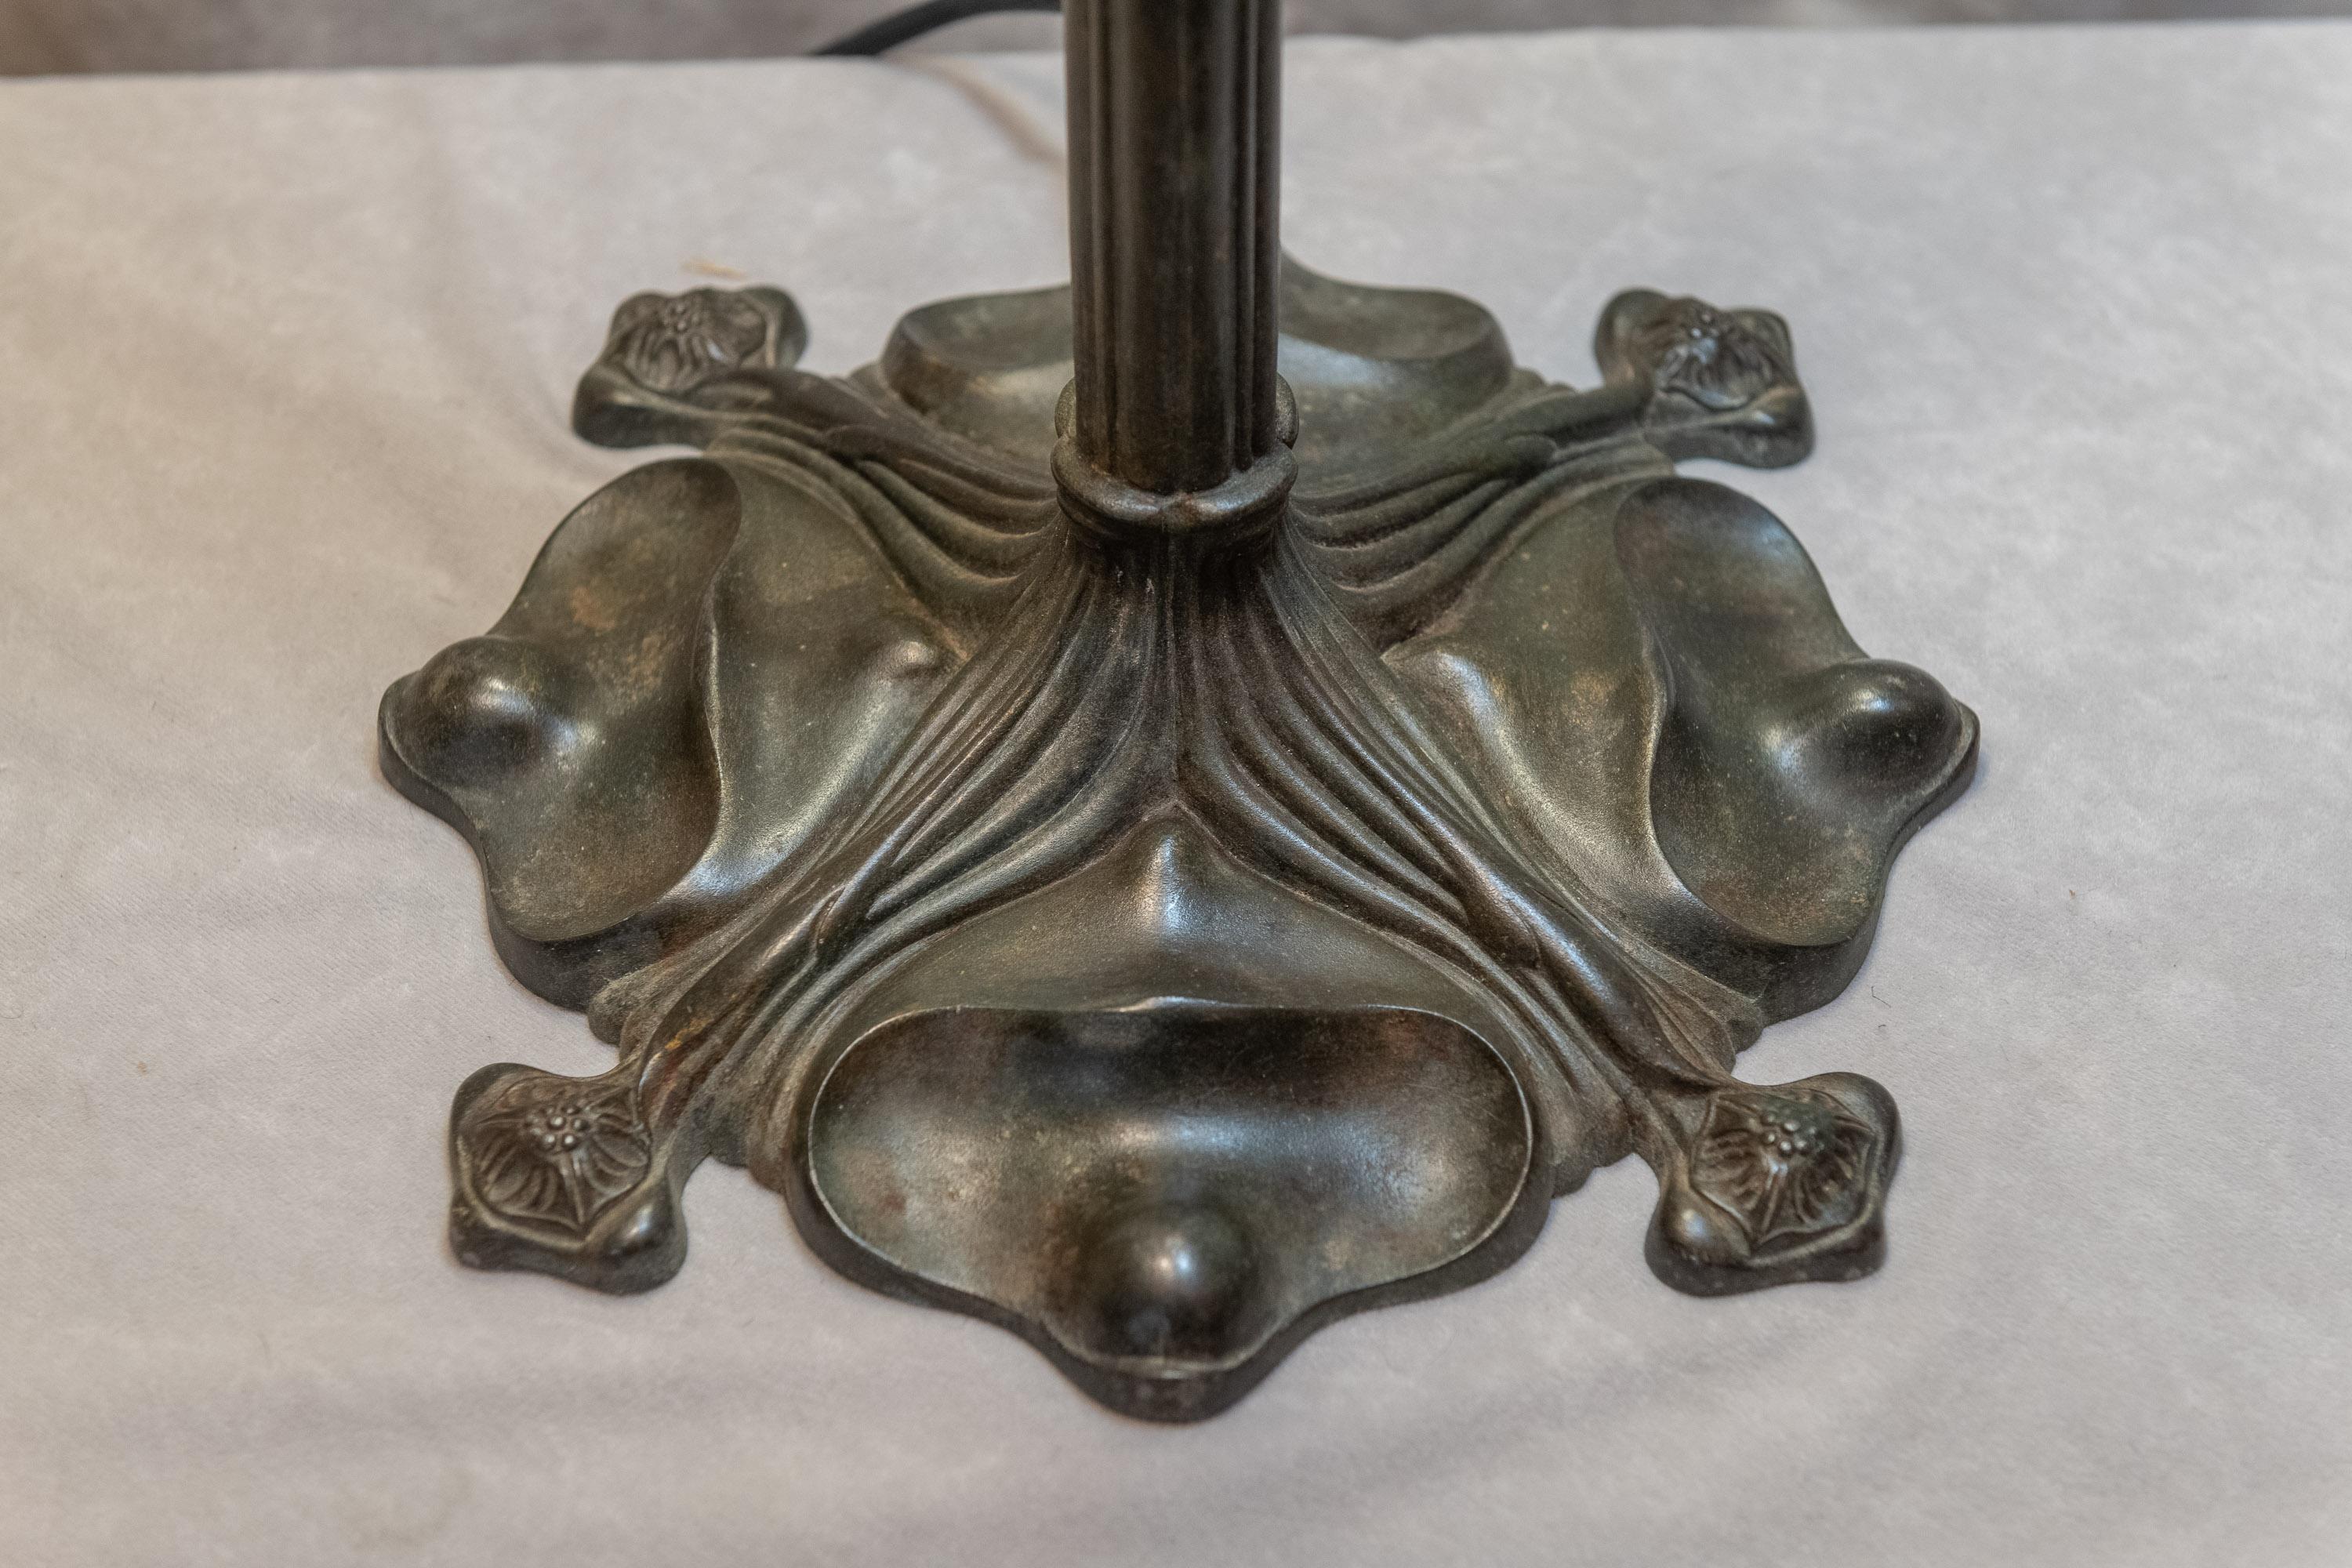 Most antique collectors when they hear the name Gorham think about their fabulous silver work. They also cast some of the best American bronzes in their foundry. Lesser known is their production of some of the finest leaded glass table lamps of the